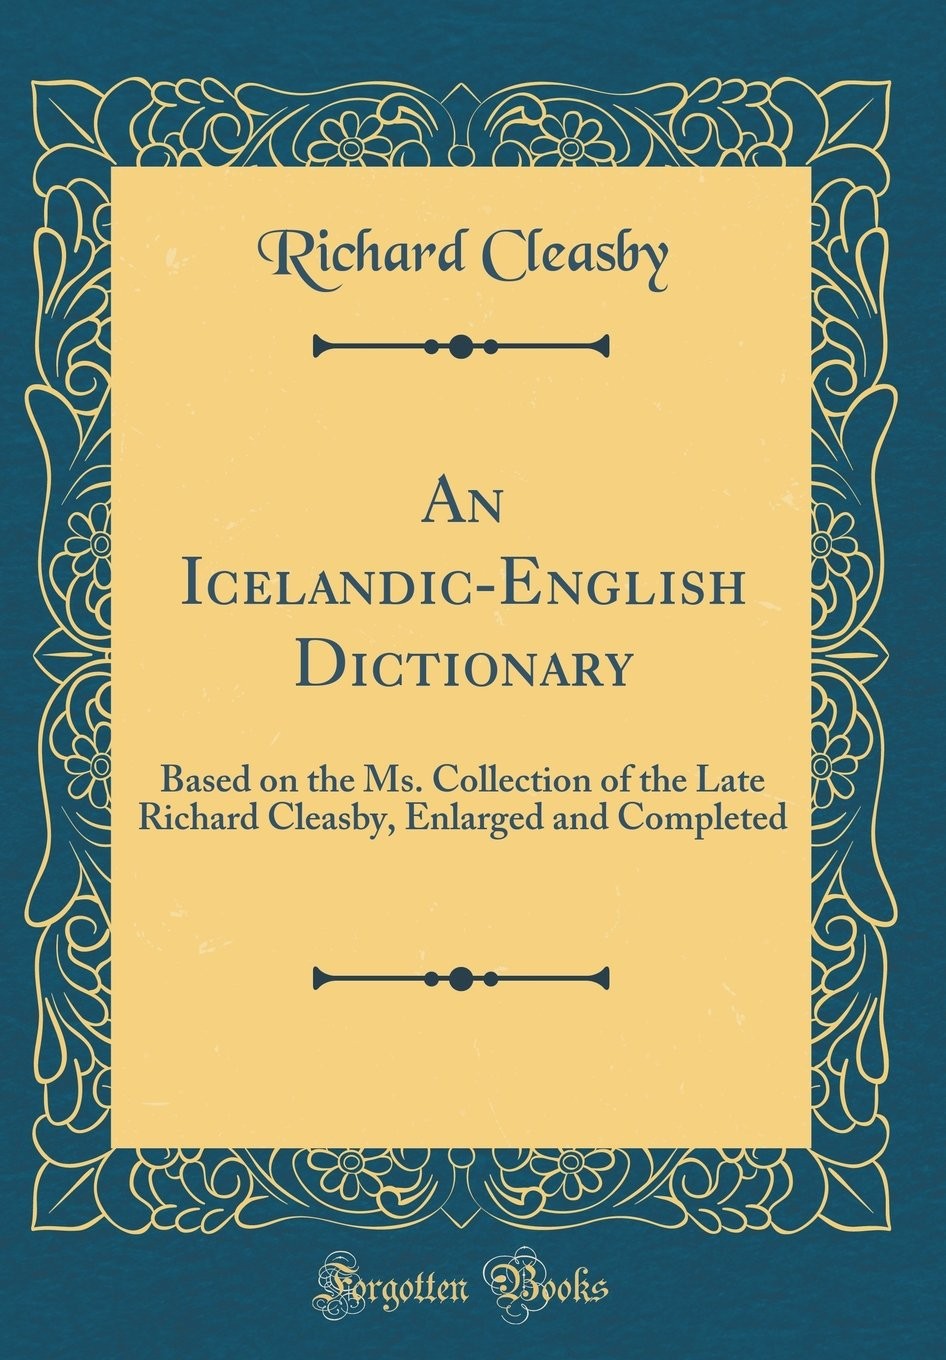 An Icelandic-English Dictionary: Based on the Ms. Collection of the Late Richard Cleasby